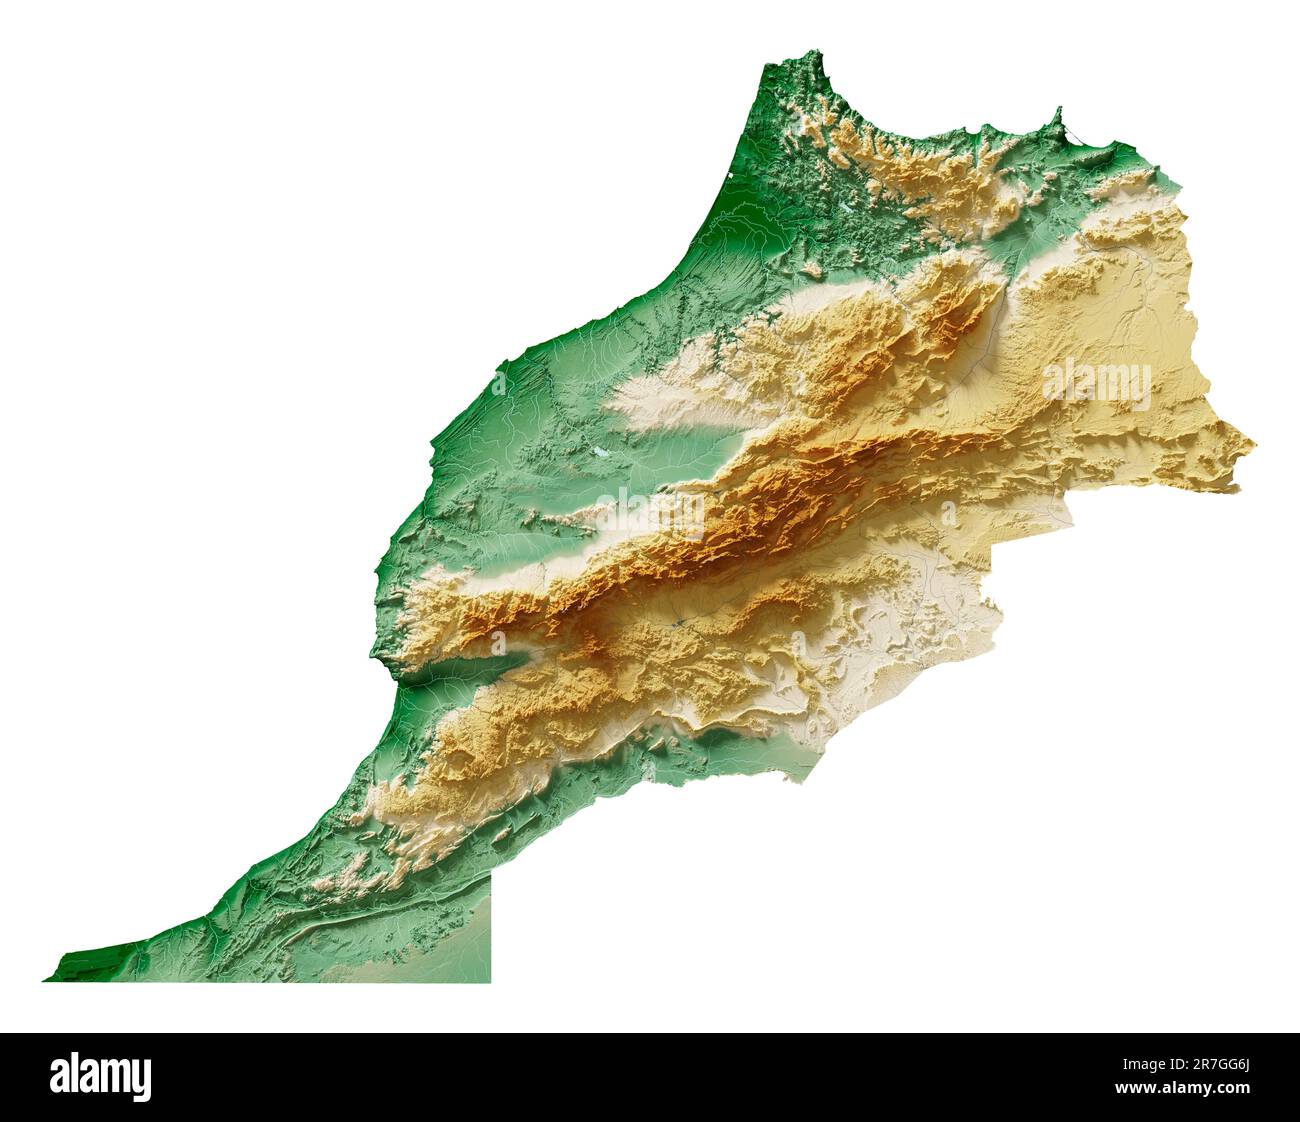 Morocco Detailed 3d Rendering Of A Shaded Relief Map With Rivers And Lakes Colored By Elevation White Background Created With Satellite Data 2R7GG6J 